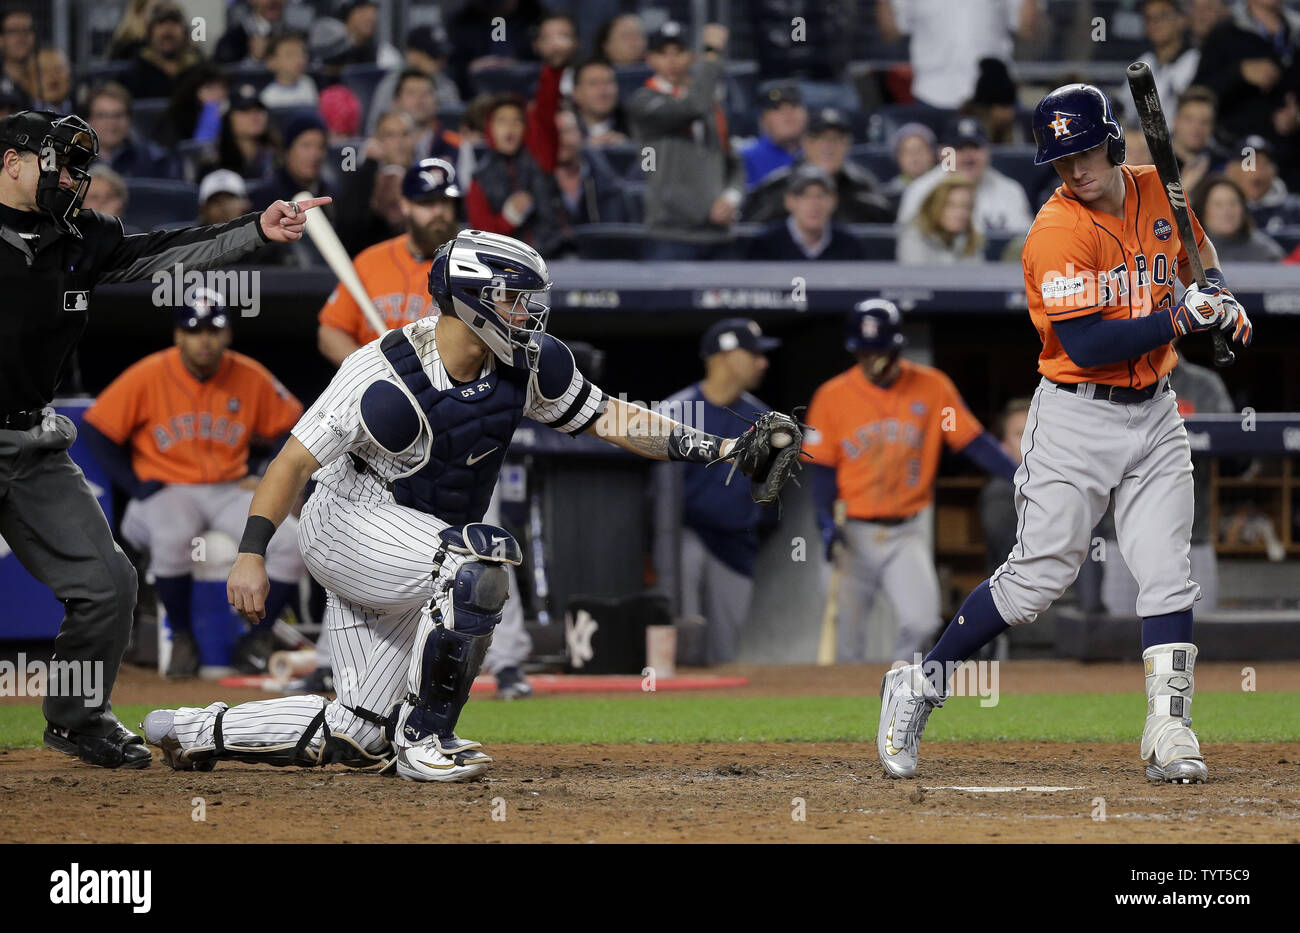 New York Yankees catcher Gary Sanchez (C) reacts as umpire Chris Guccione (L) calls out Houston Astros batter Alex Bregman (R) in the ninth inning in game 4 of the 2017 MLB Playoffs American League Championship Series at Yankee Stadium in New York City on October 17, 2017.      Photo by Ray Stubblebine/UPI Stock Photo